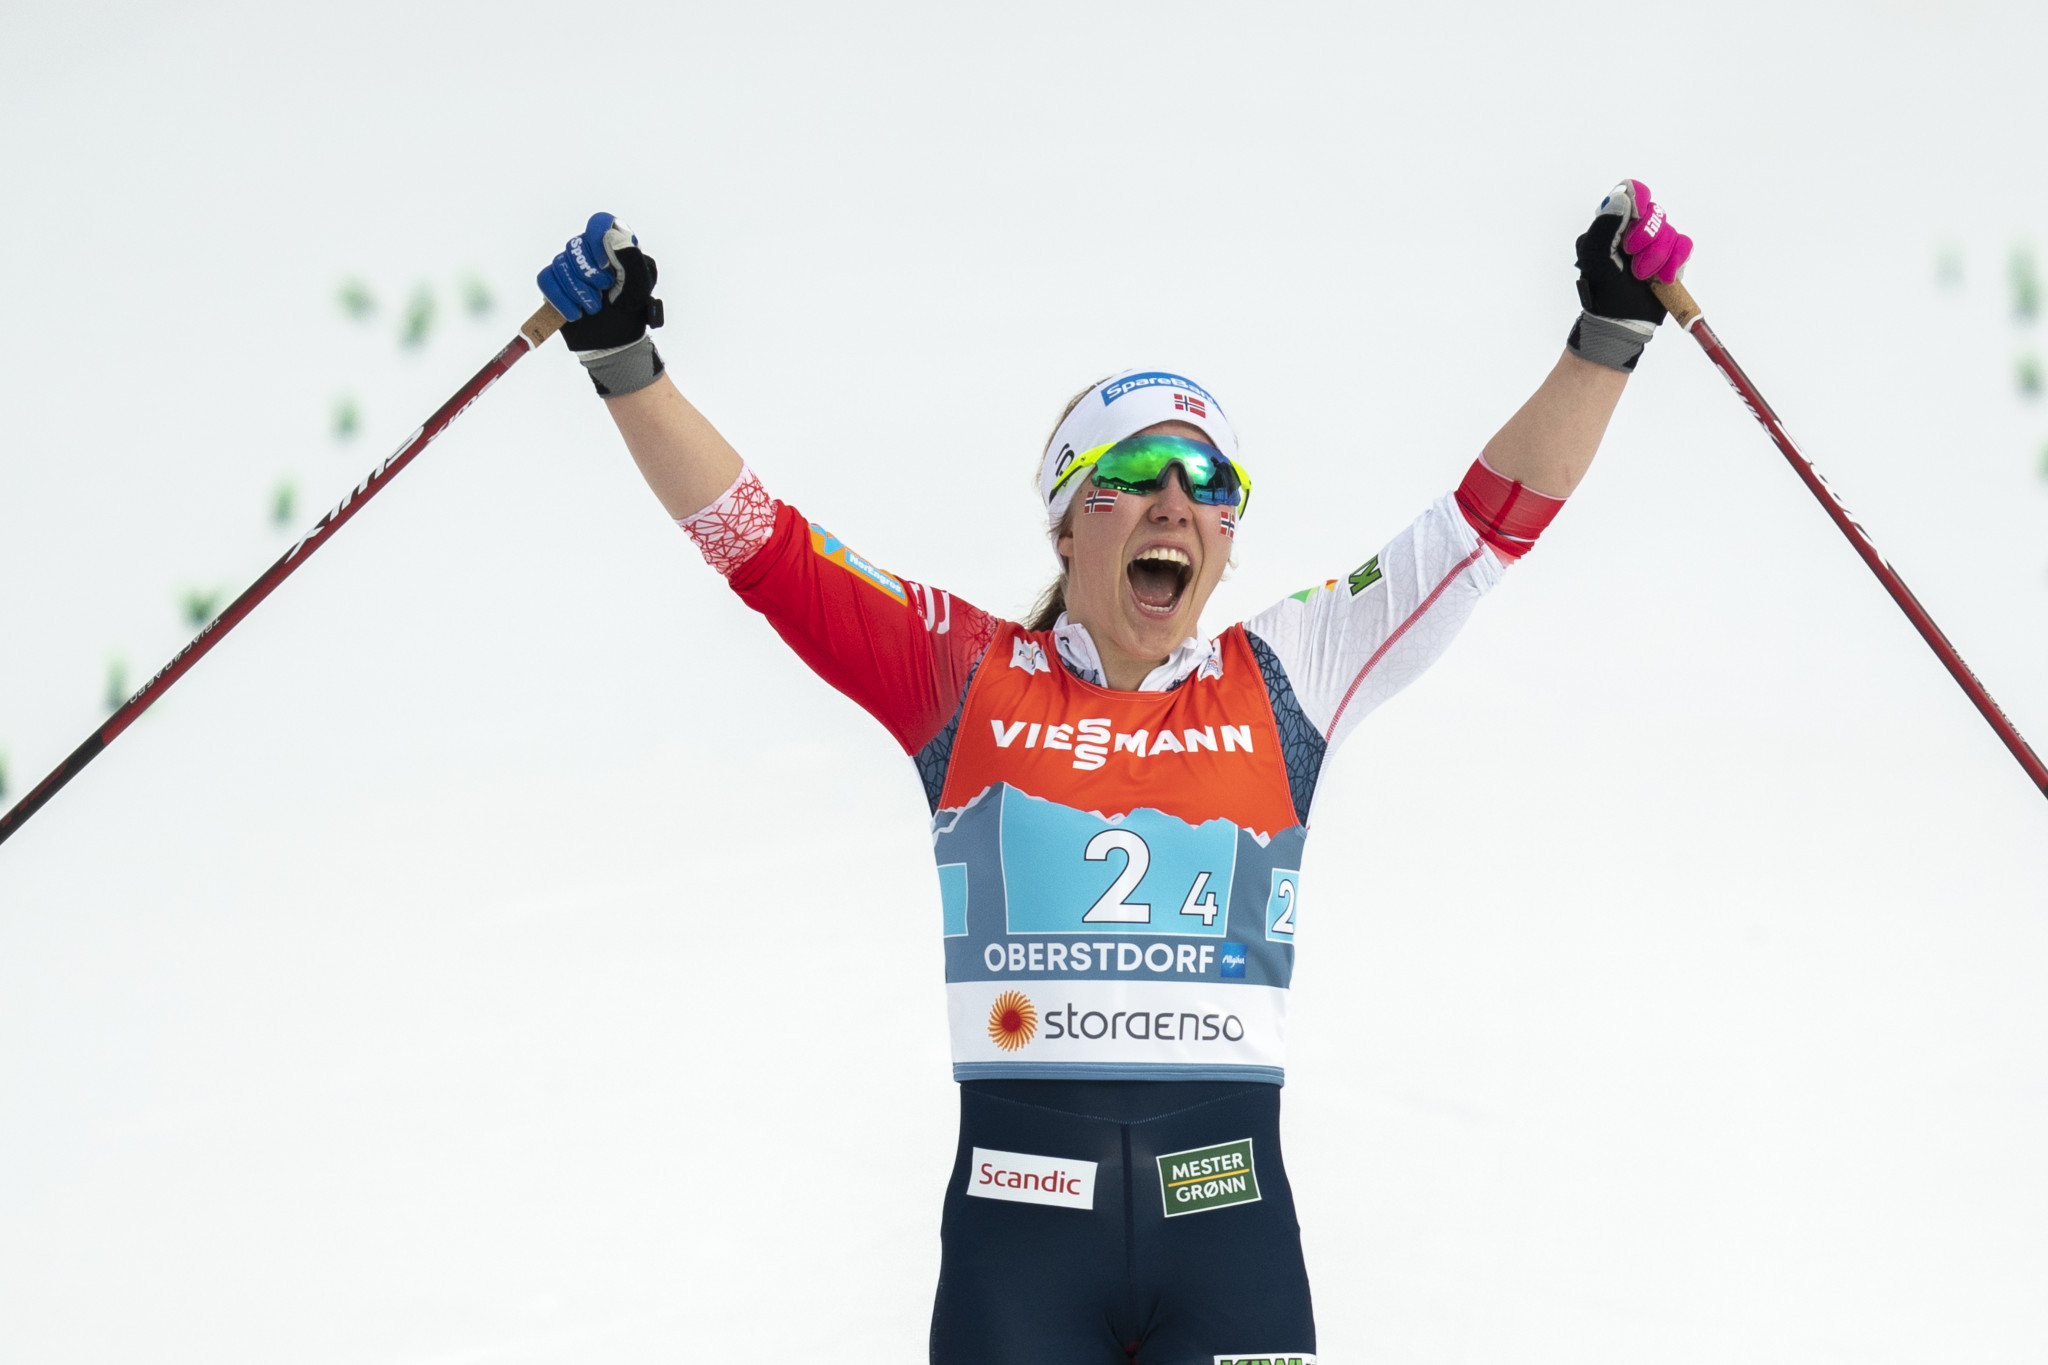 Nineteen-year-old skier and mountain biker Fossesholm named in Norway’s senior cross-country team for Olympic season